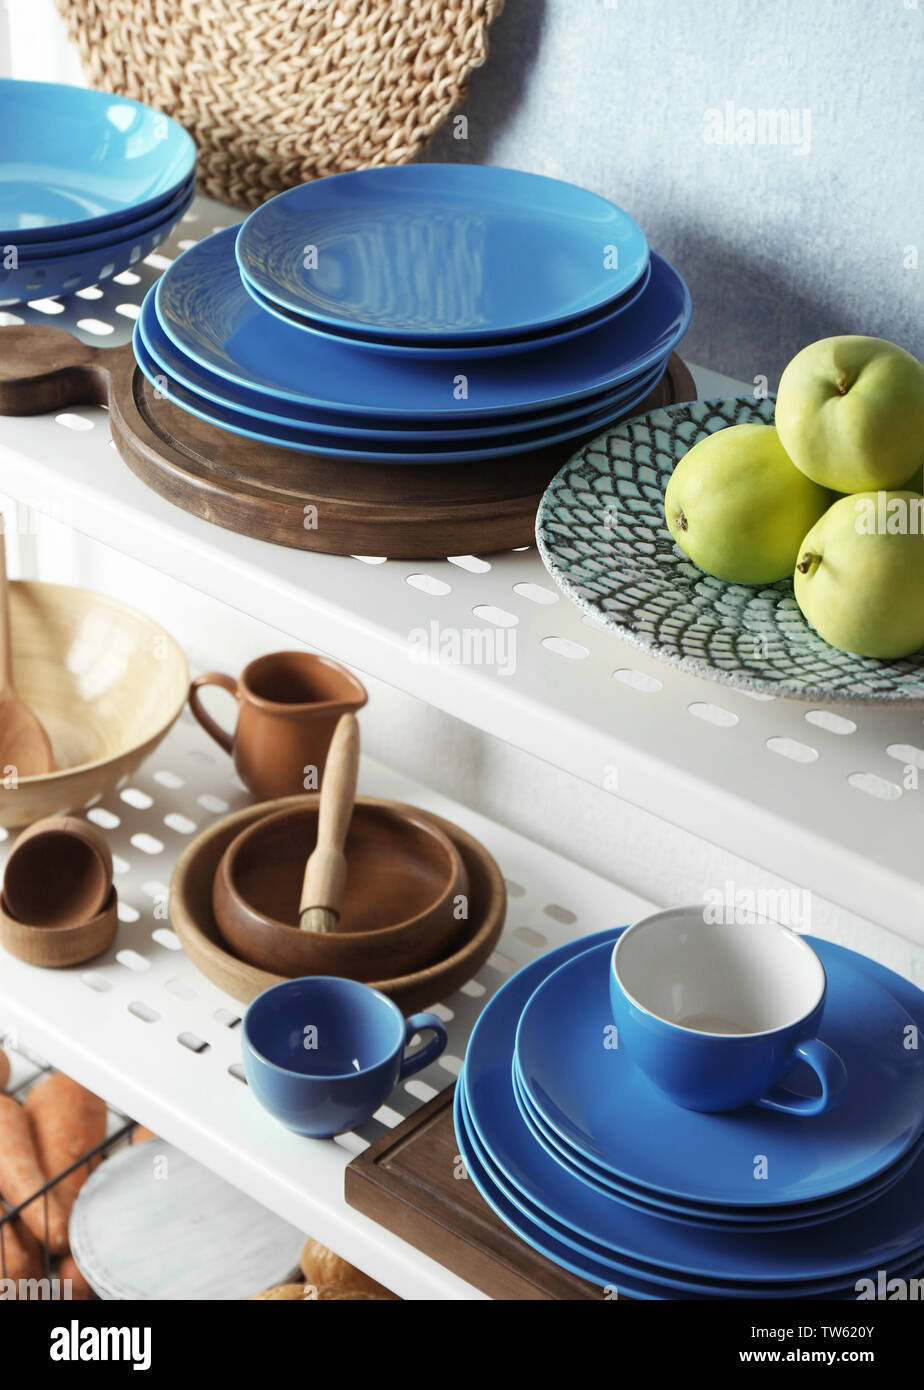 Colorful Kitchenware And Fruits On Storage Stand Indoors TW620Y 